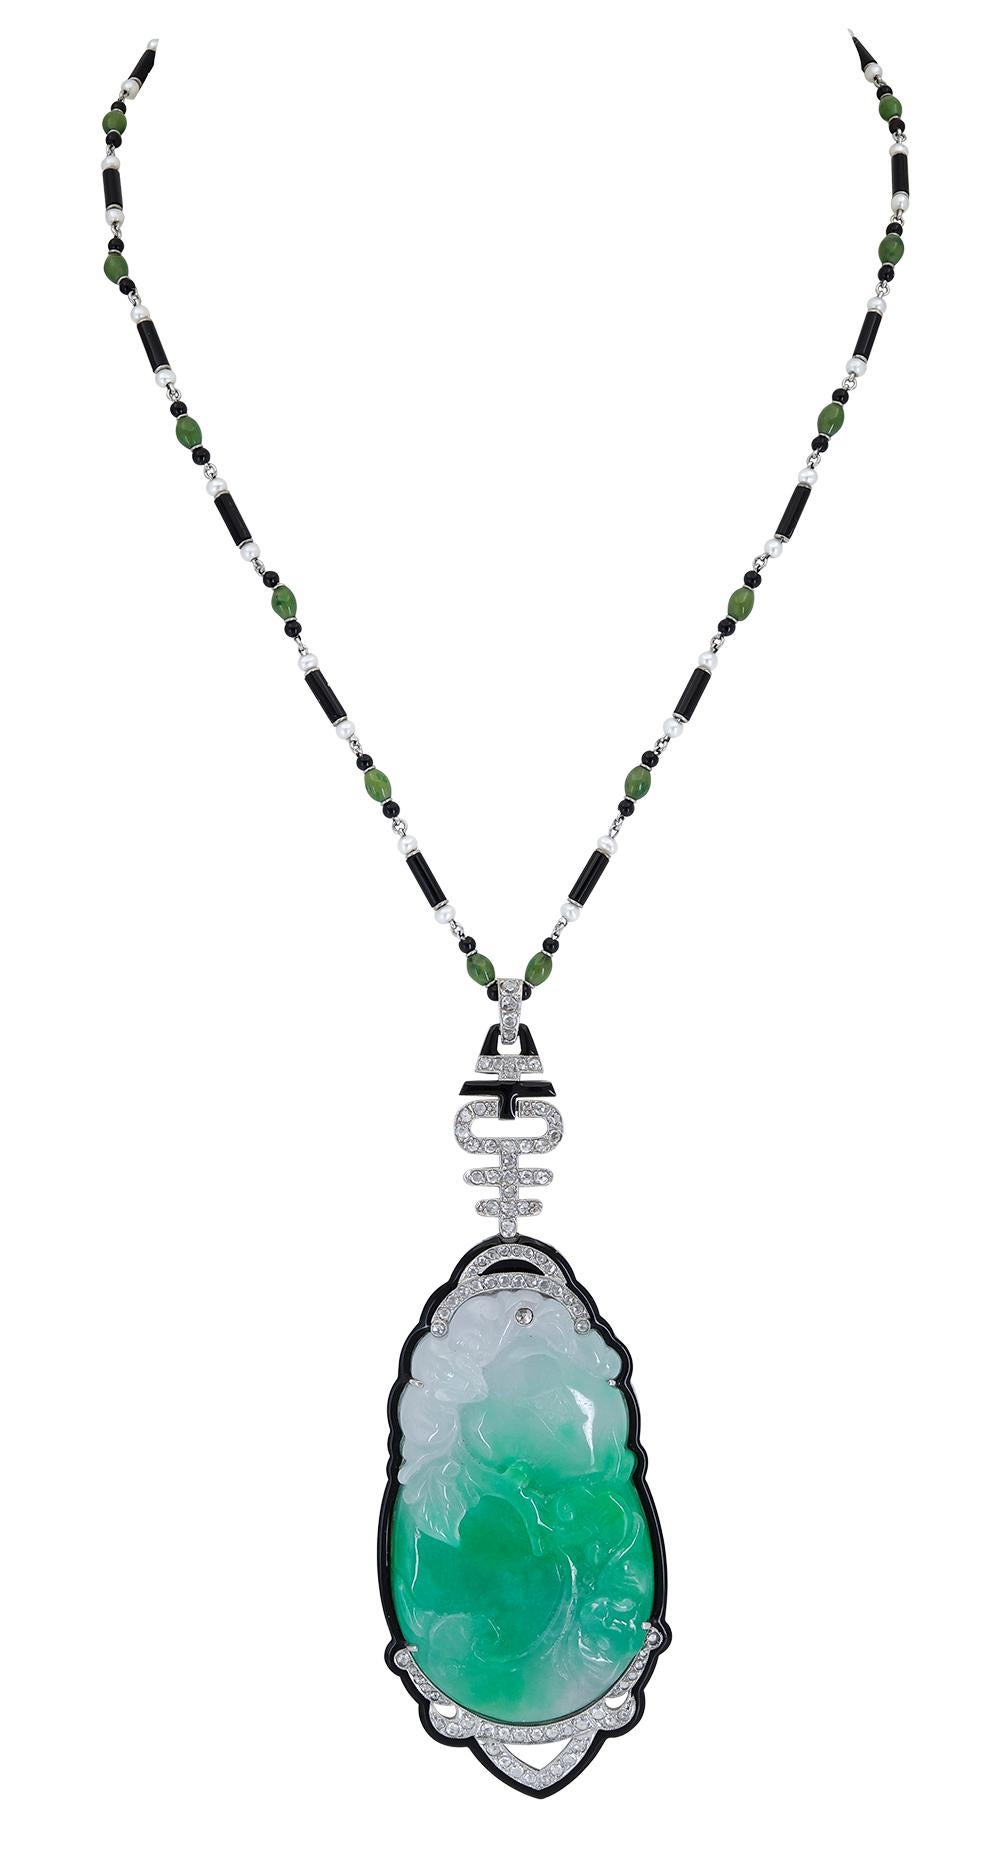 Features a hand-carved jade pendant set in an onyx and diamond surround. Suspended on a beautiful chain made of small pearls, jade and onyx. A magnificent piece of jewelry.

Pendant Dimensions: 4.00 in x 1.375 in
Chain Length: 17.75 in
Chain